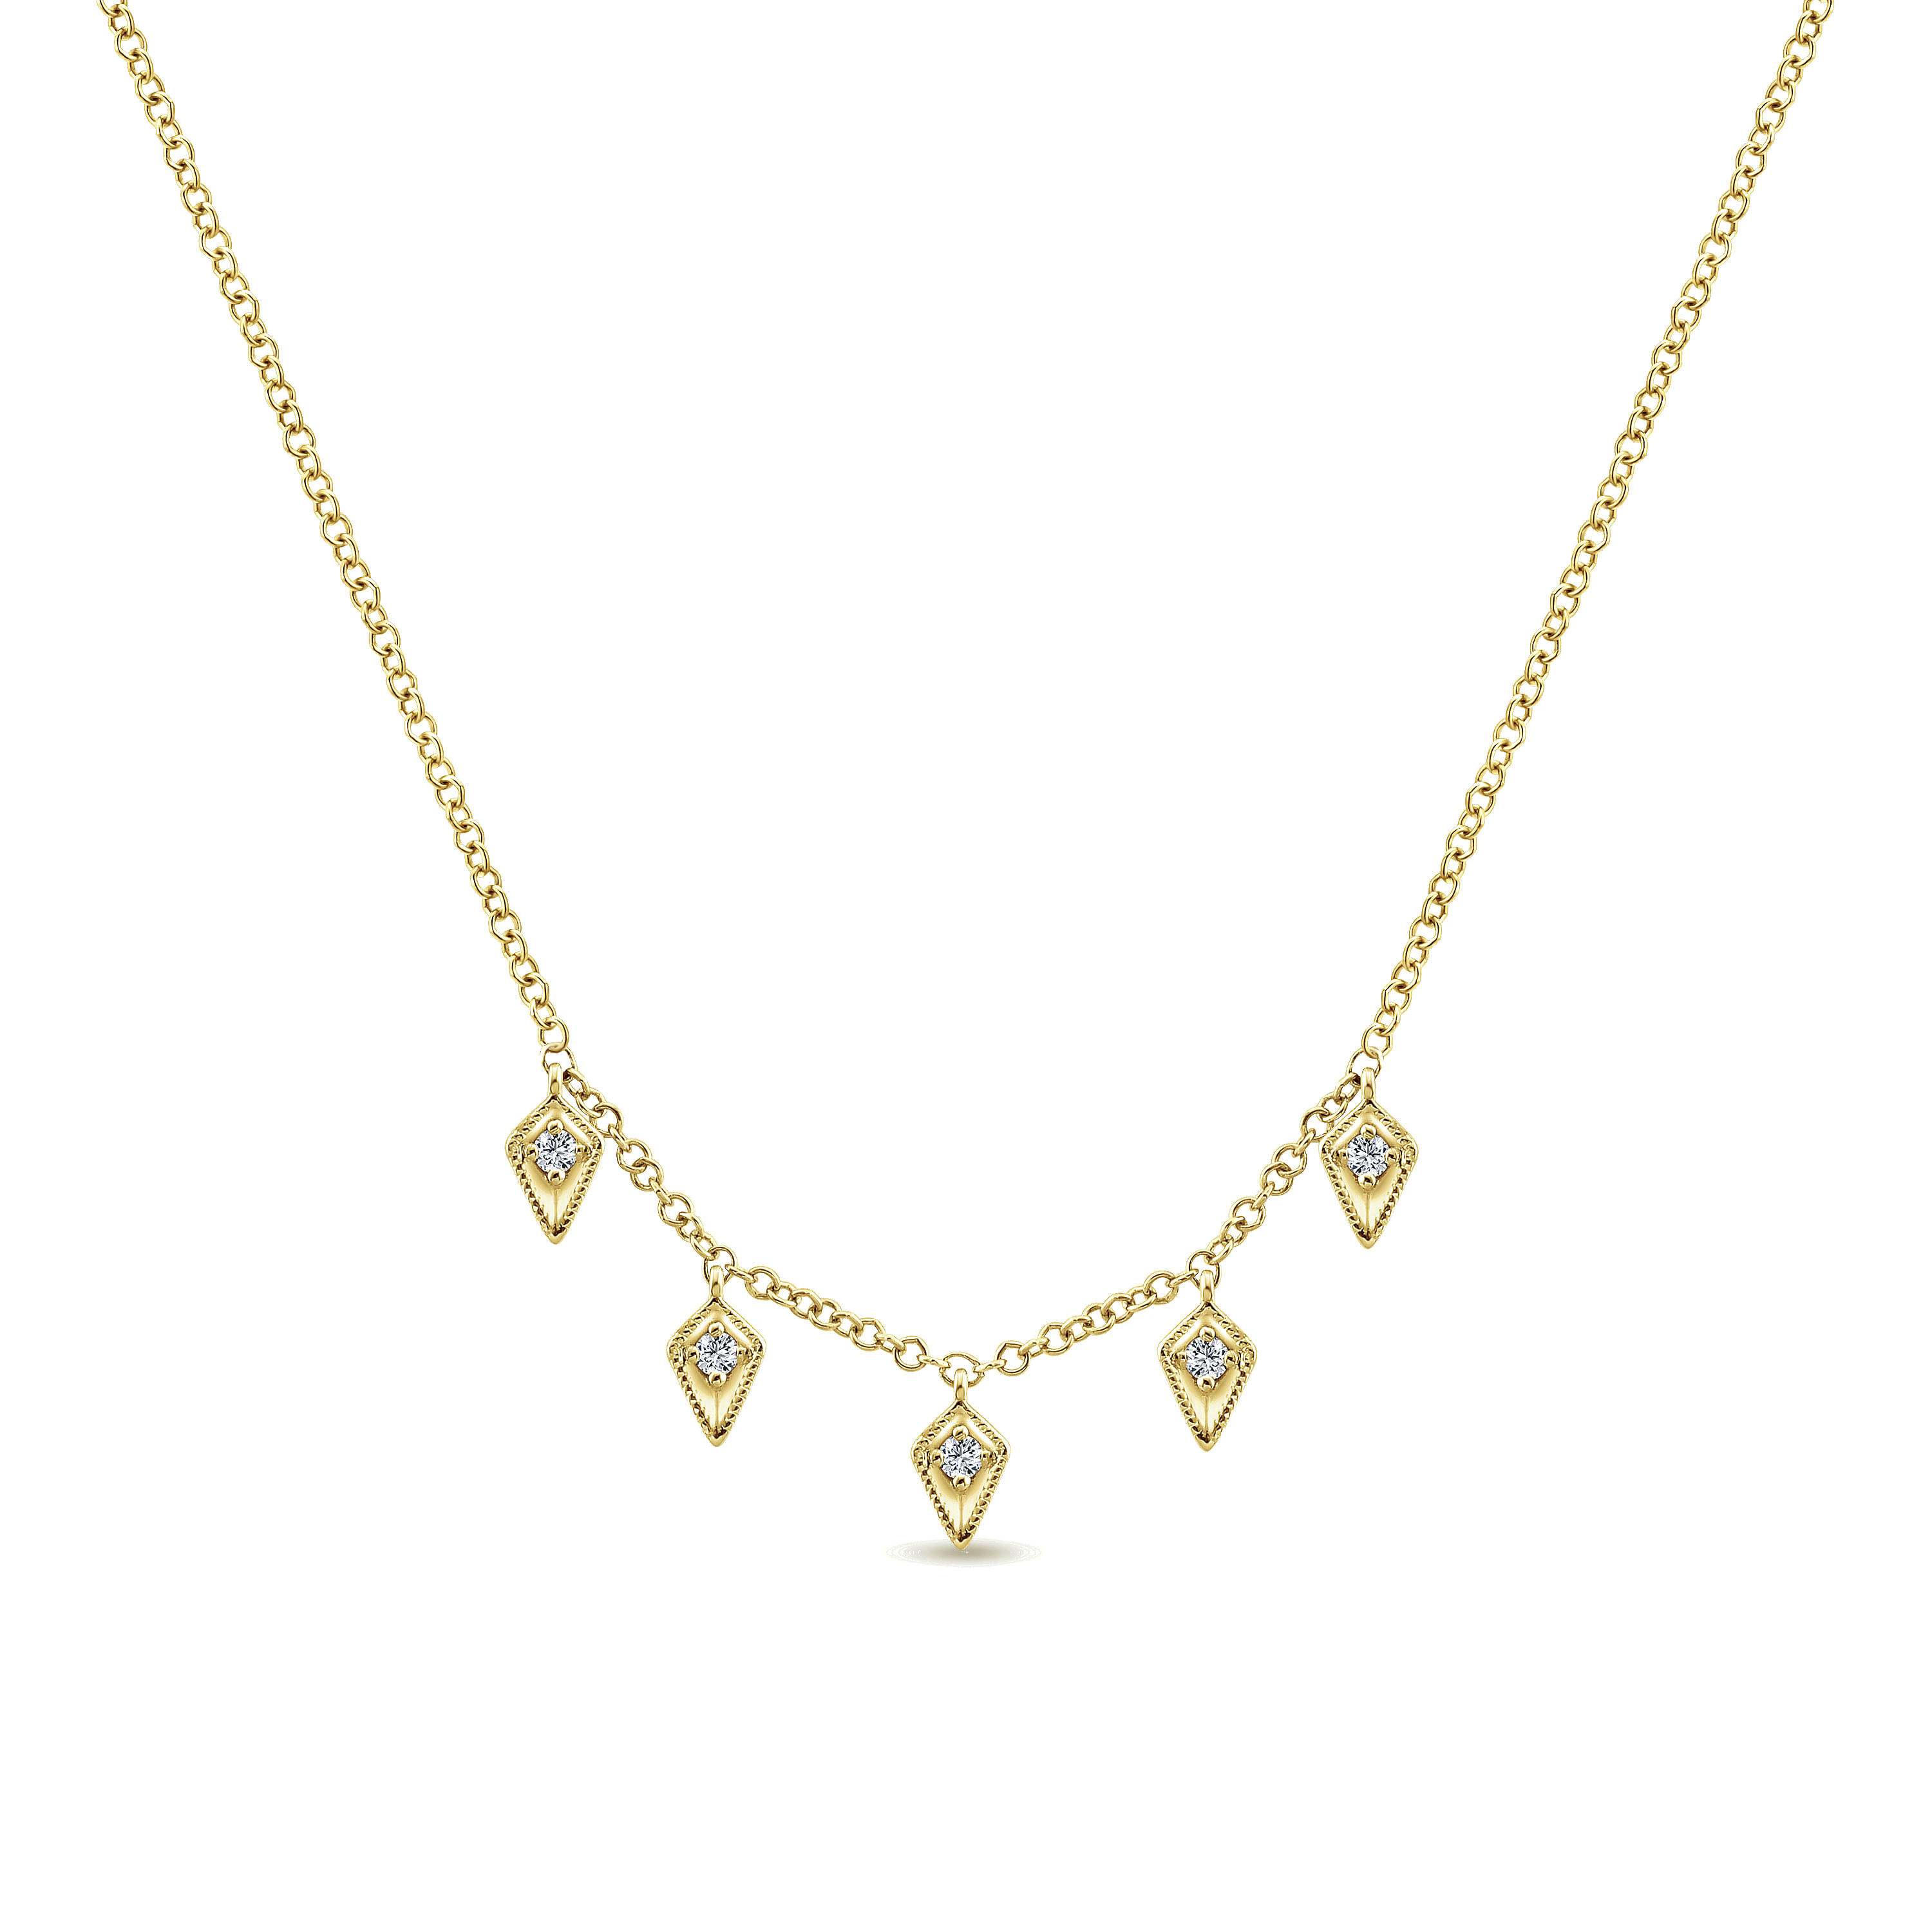 14K Yellow Gold Kite Shaped Drops Station Necklace with Diamonds